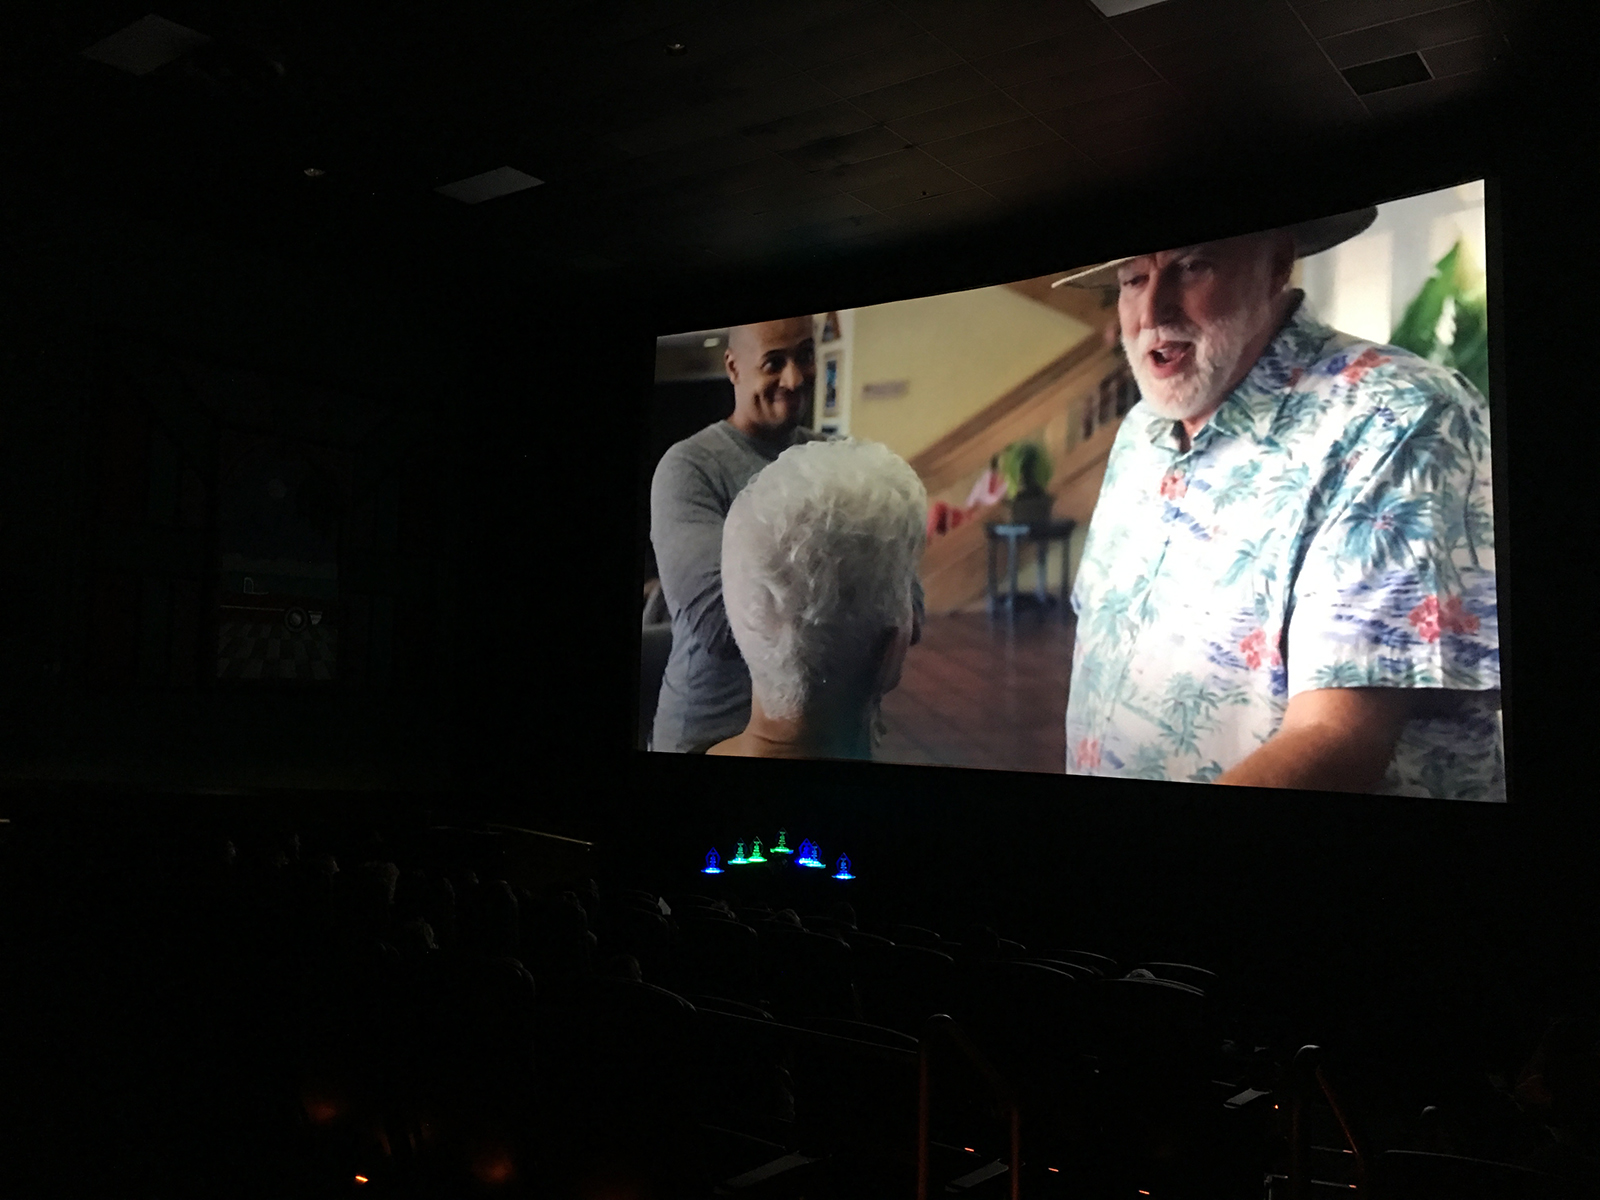 One of the many Bonita Springs Short Film Festival films on a large movie theater screen